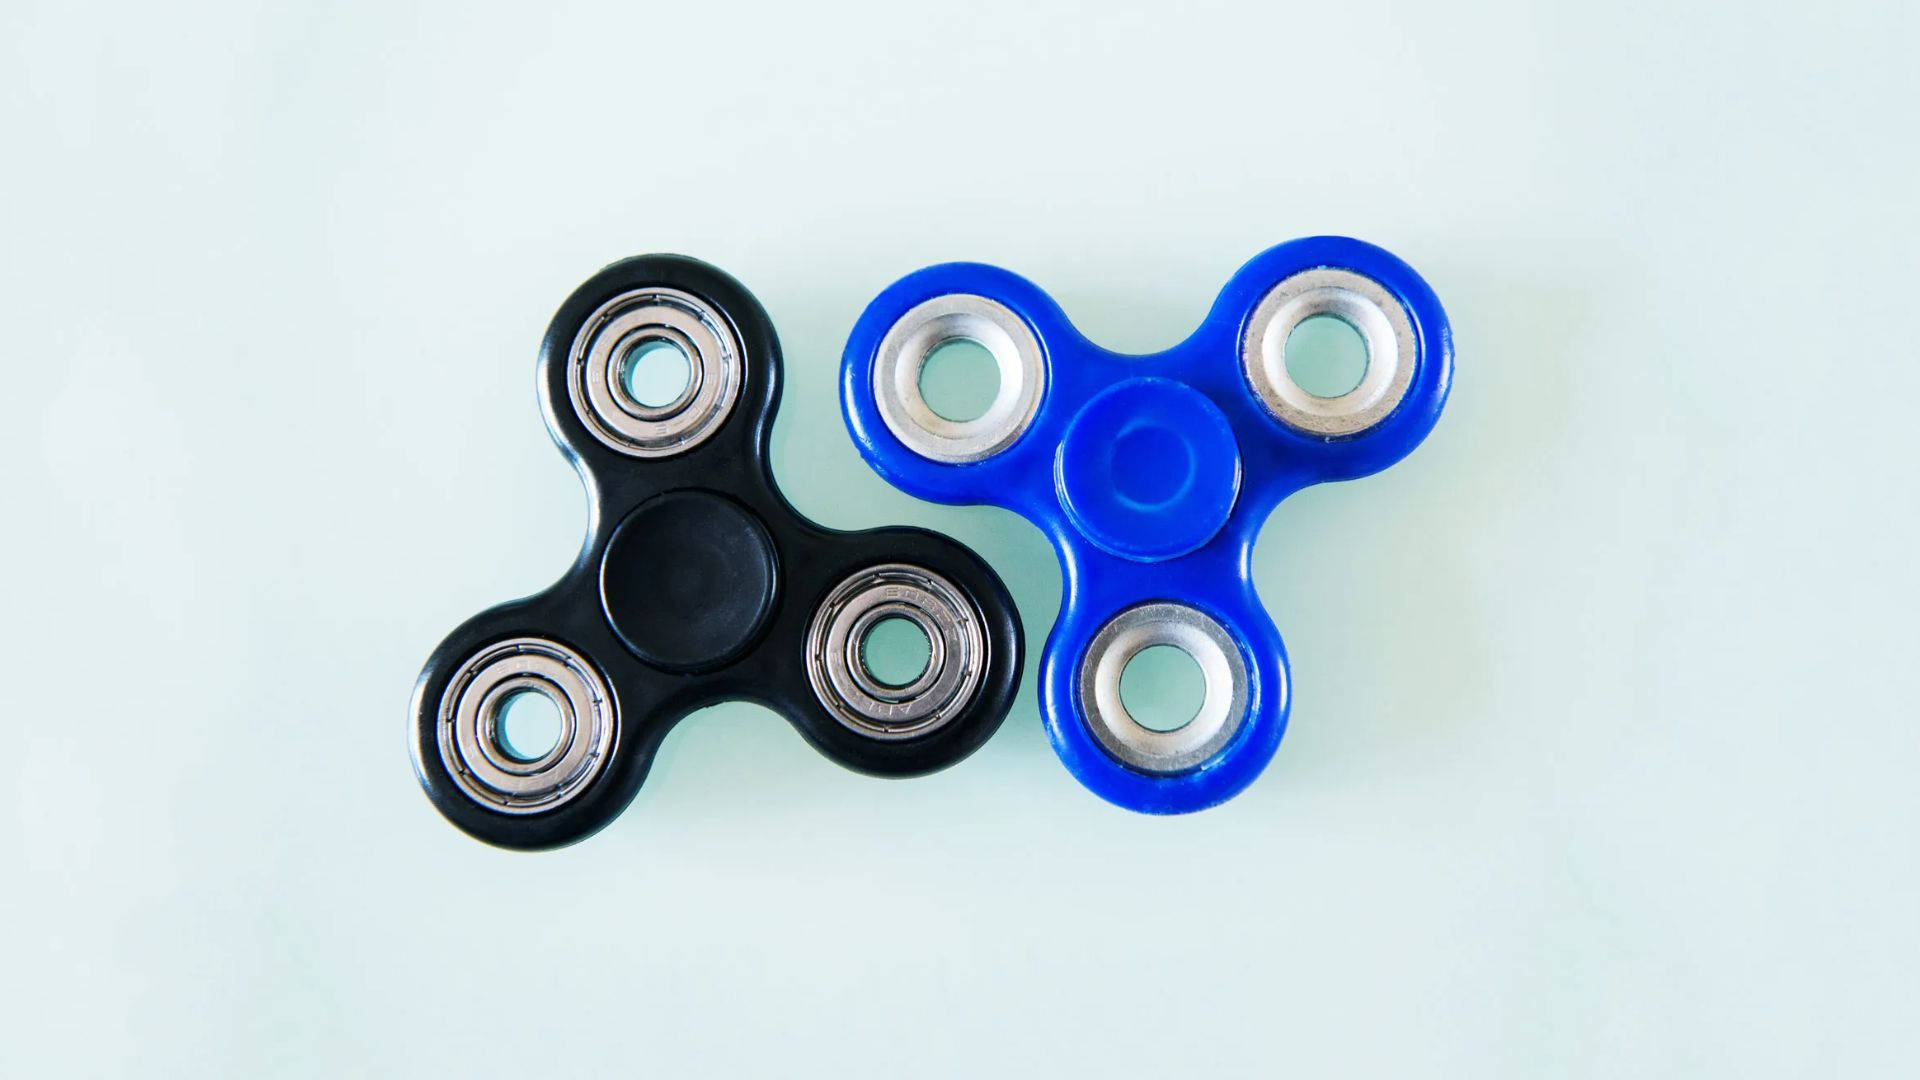 Soothing Design: Black and Blue Fidget Toys Wallpaper